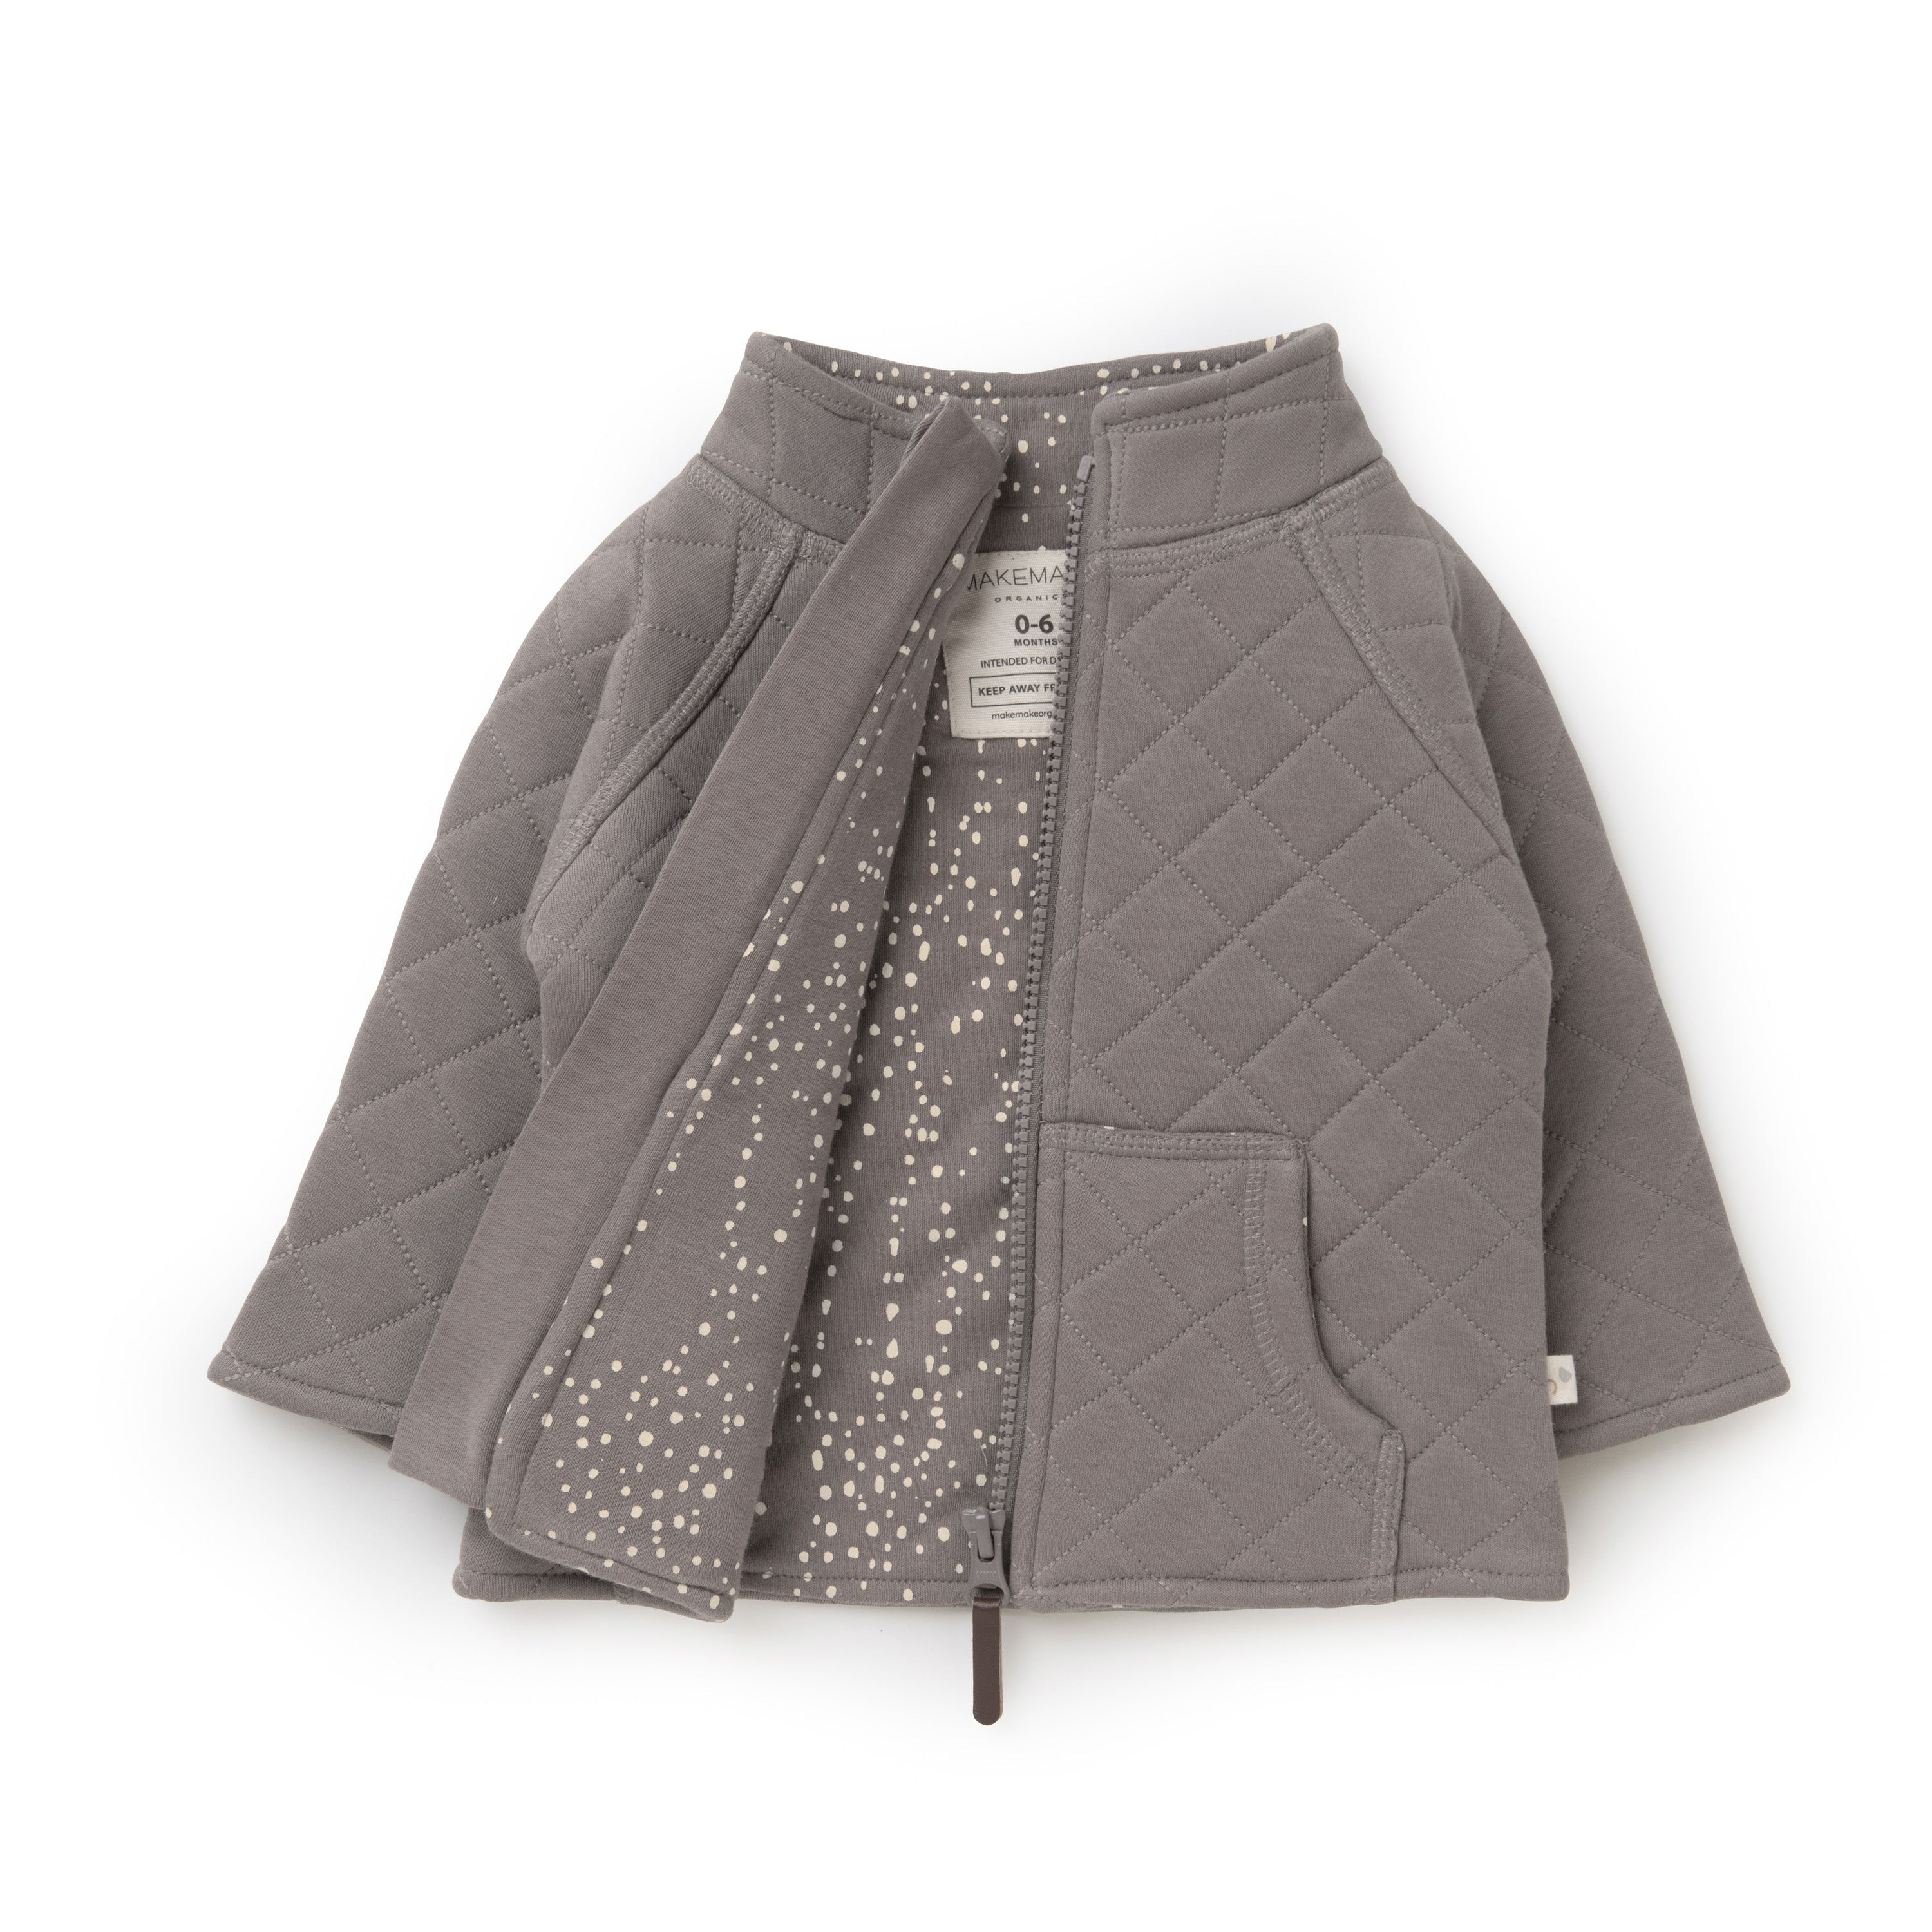 A Organic Kids gray quilted jacket with a studded design on the lower half, displayed against a white background. The jacket is partially zipped and laid flat.